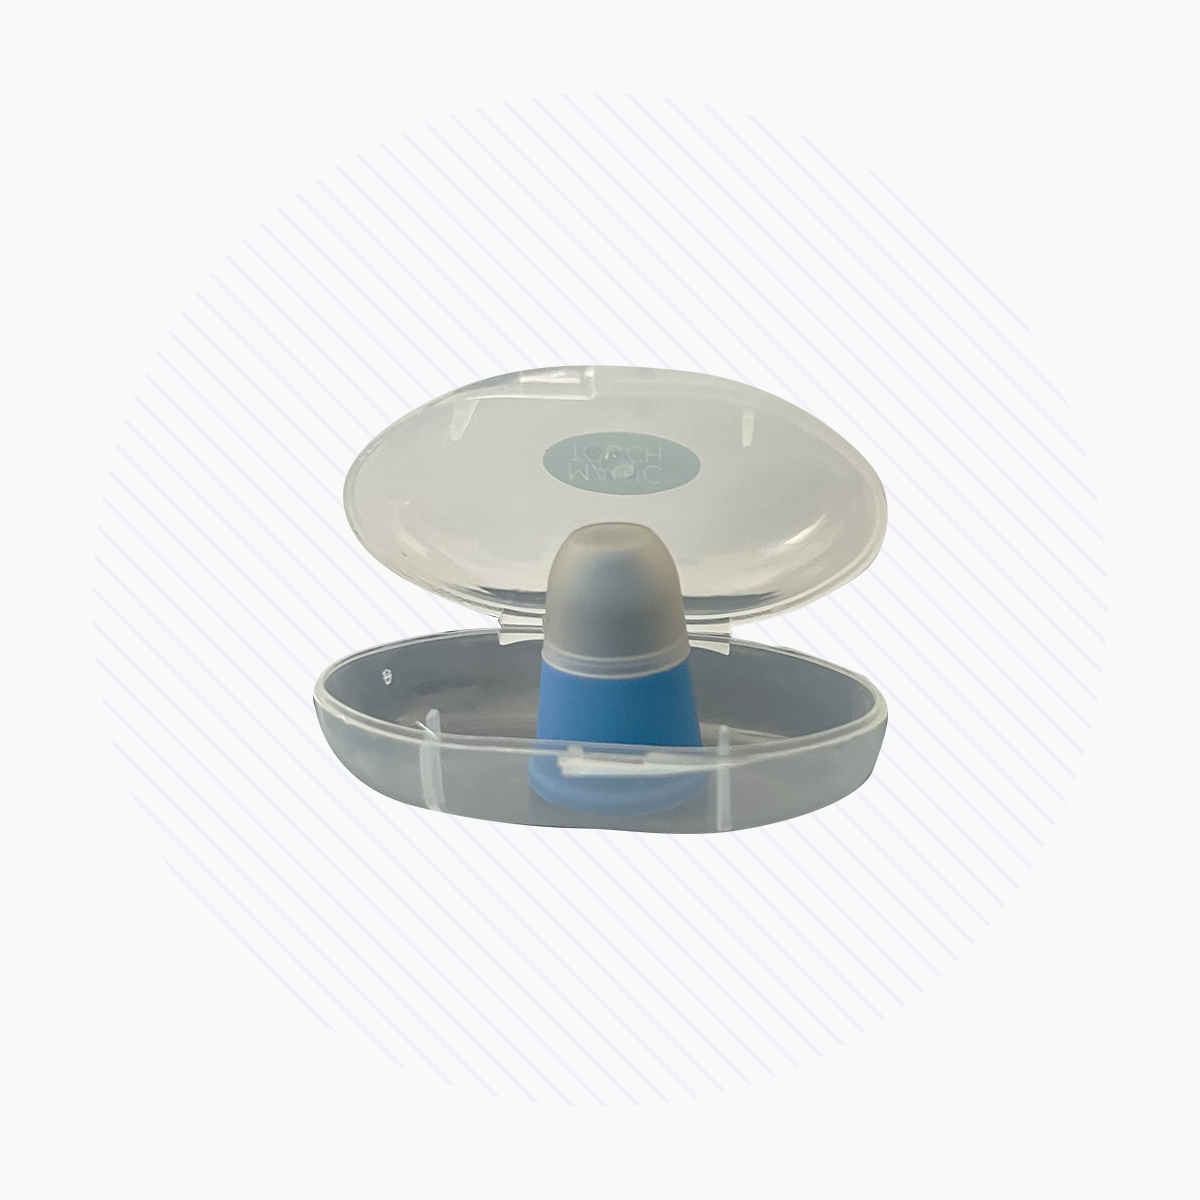 Magic Touch Eye Drop Applicator, Easy to Use, Reduce Waste